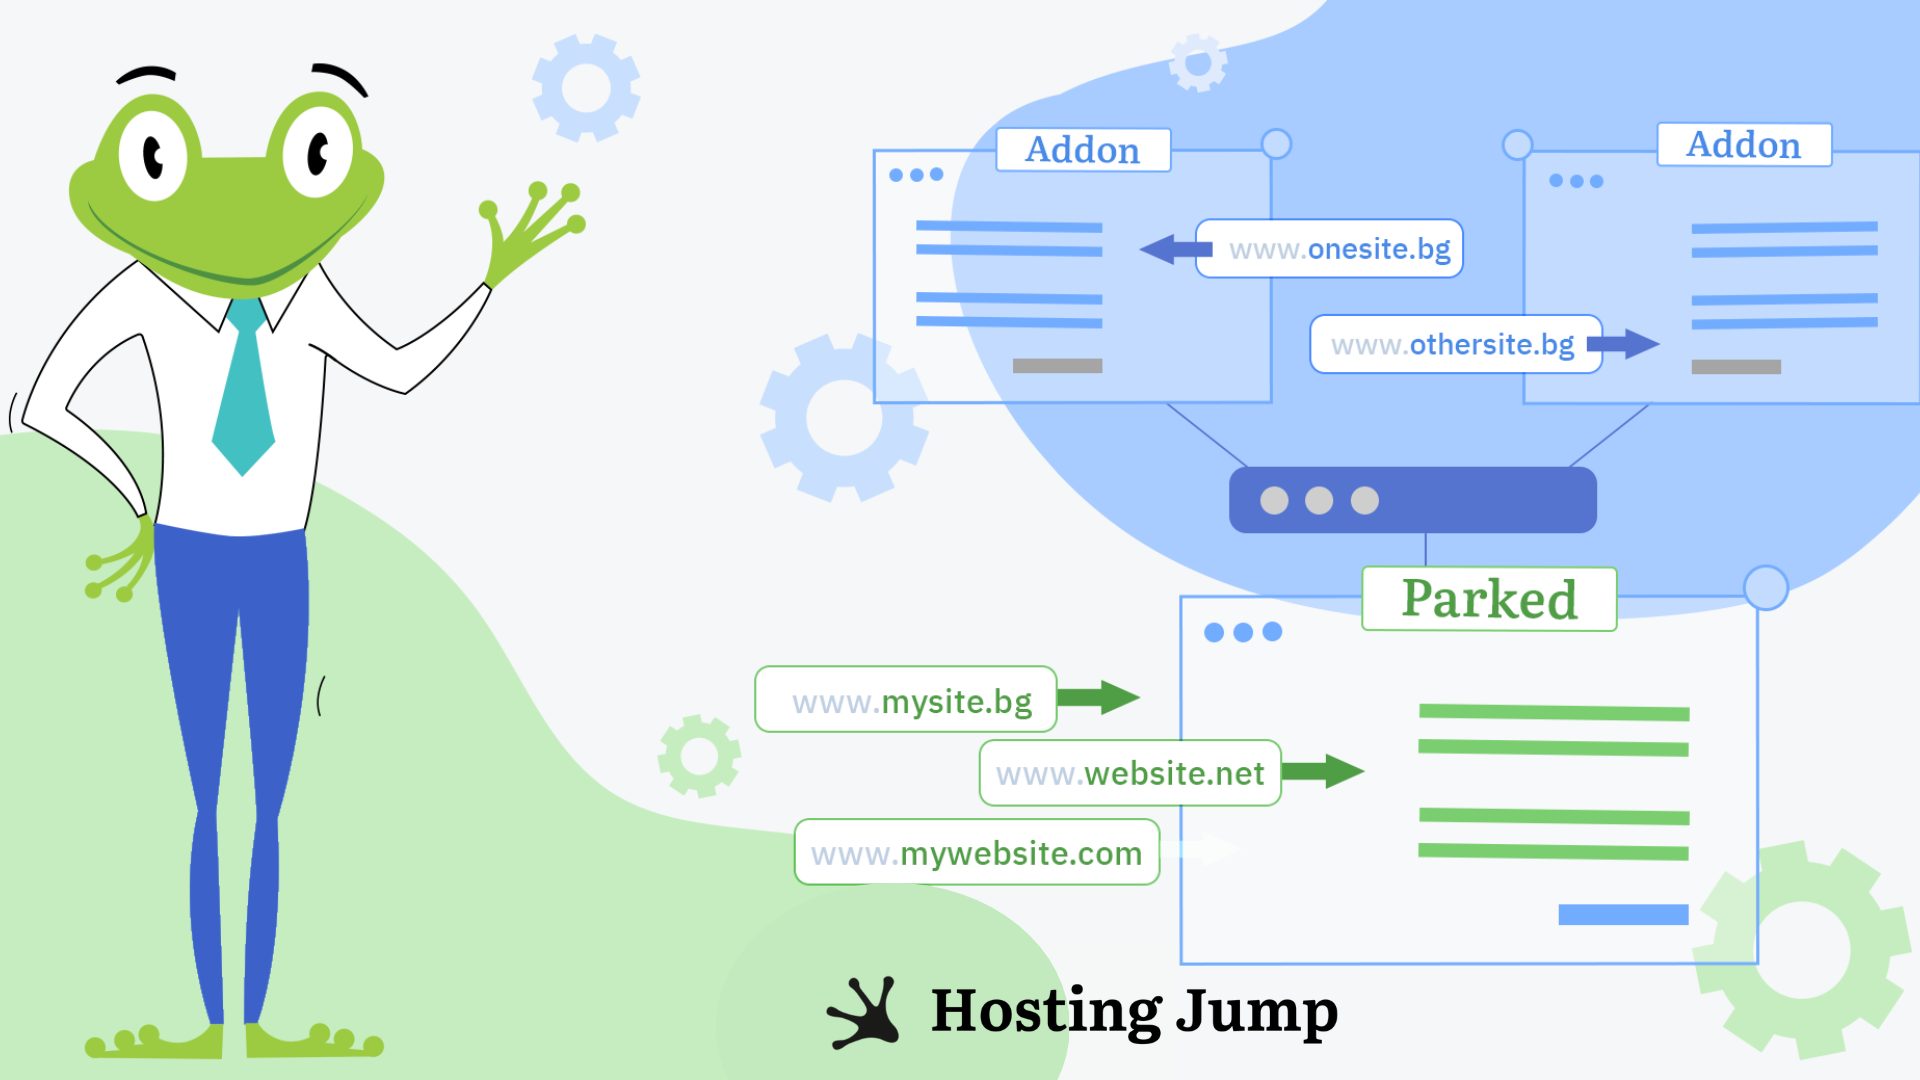 What Is the Difference Between Addon and Parked Domains?